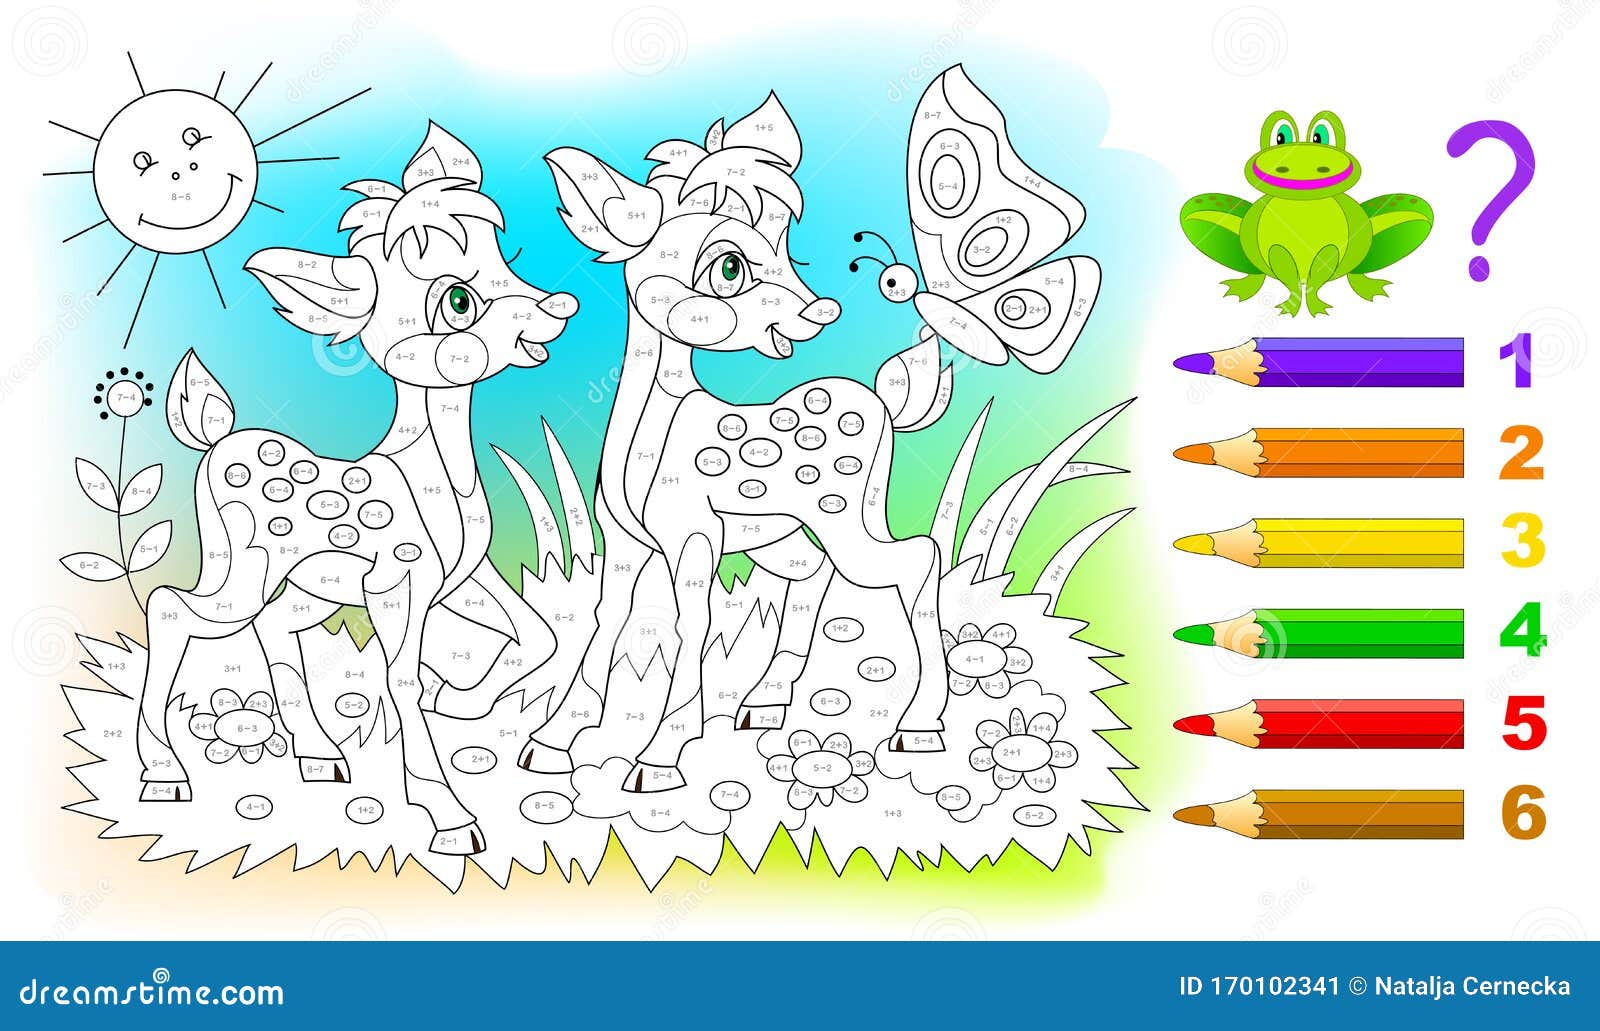 math education for children. coloring book. mathematical exercises on addition and subtraction. solve examples and paint the deer.